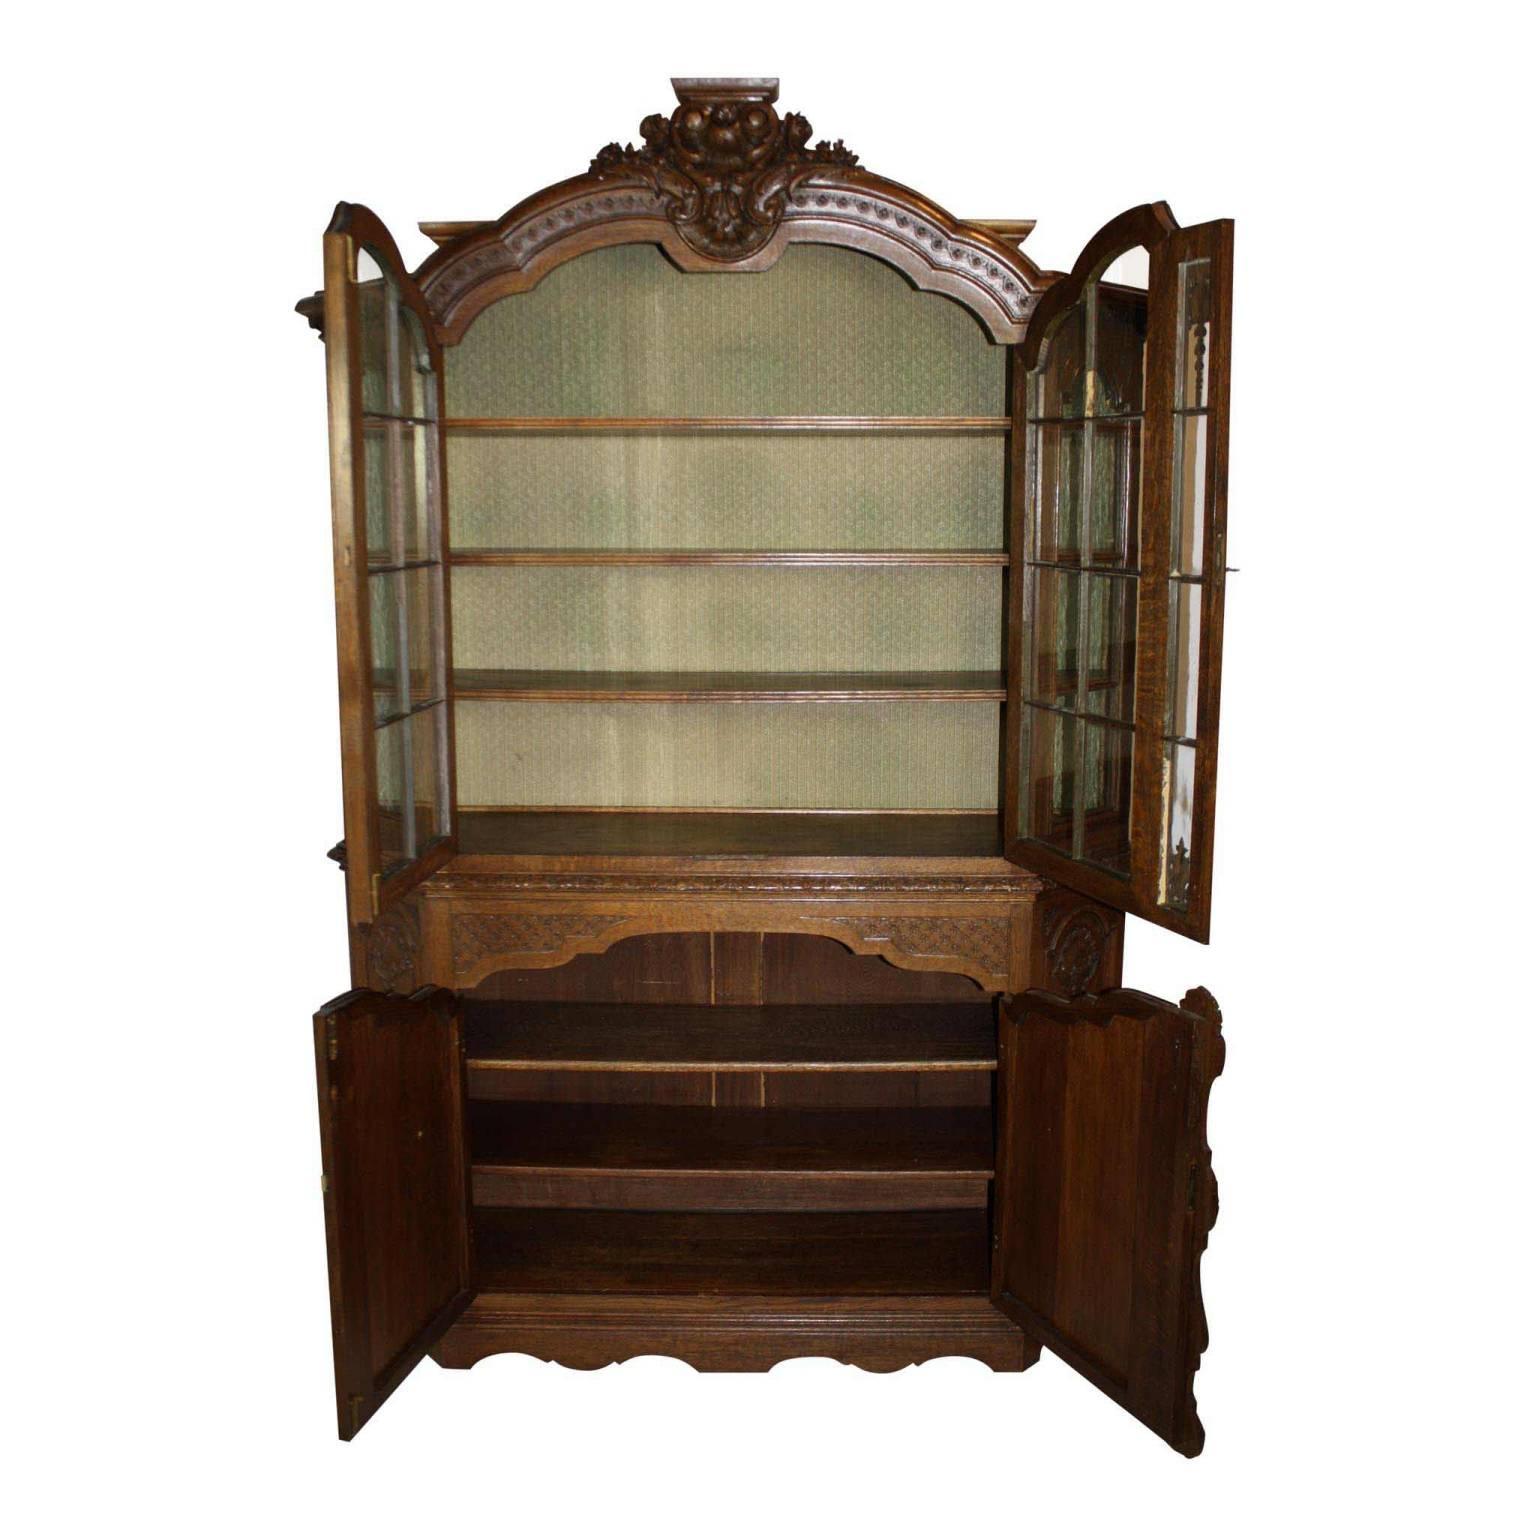 This substantial, quarter sawn oak, hutch has seven shelves with upper glass display comprised of windowed glass panels, floral, leaves and shell carvings in the reliefs with simple skirt detailing. The fabric covering in the upper display case can